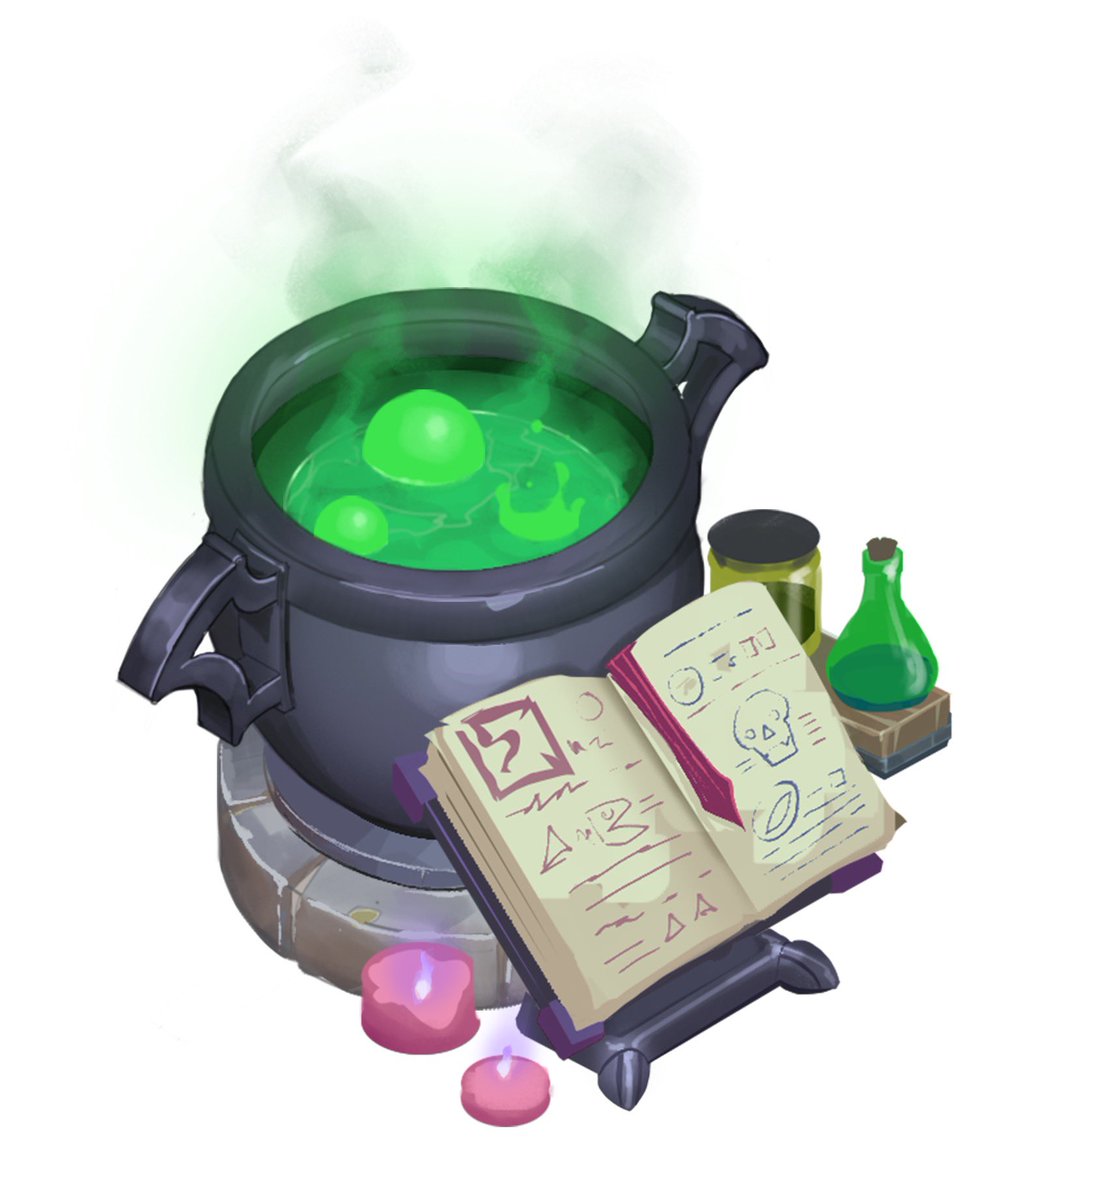 Potion making will be a big part of the game! Which cauldron would you chose for your home? 🪄

#indiedev #gamedev #cosygaming